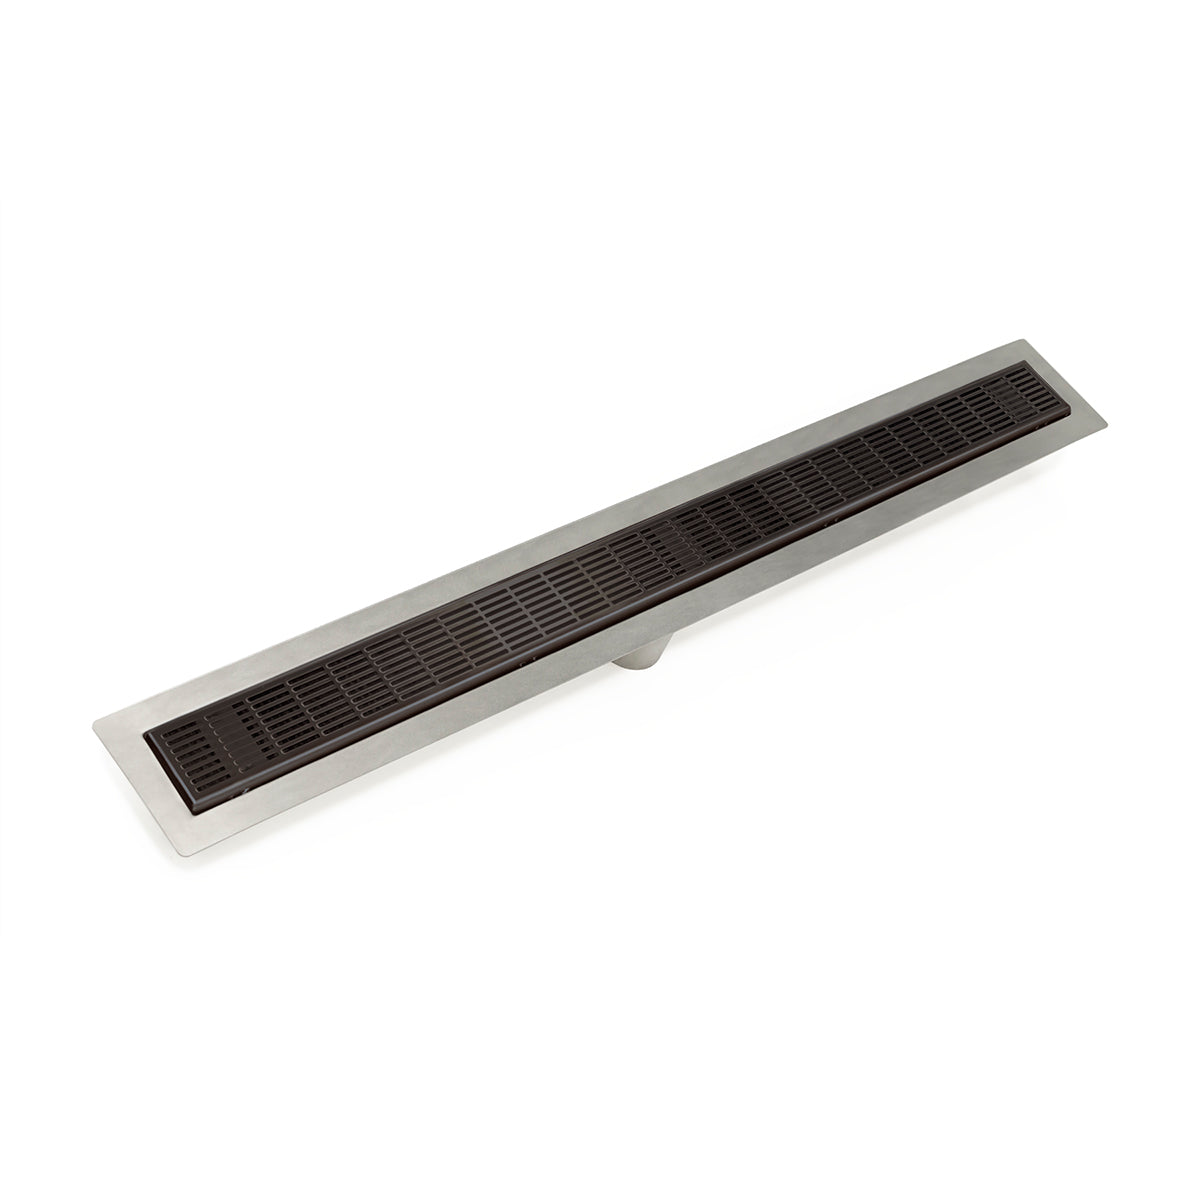 Infinity Drain 32" FF Series Fixed Flange Linear Drain Kit with 2 1/2" Perforated Slotted Grate